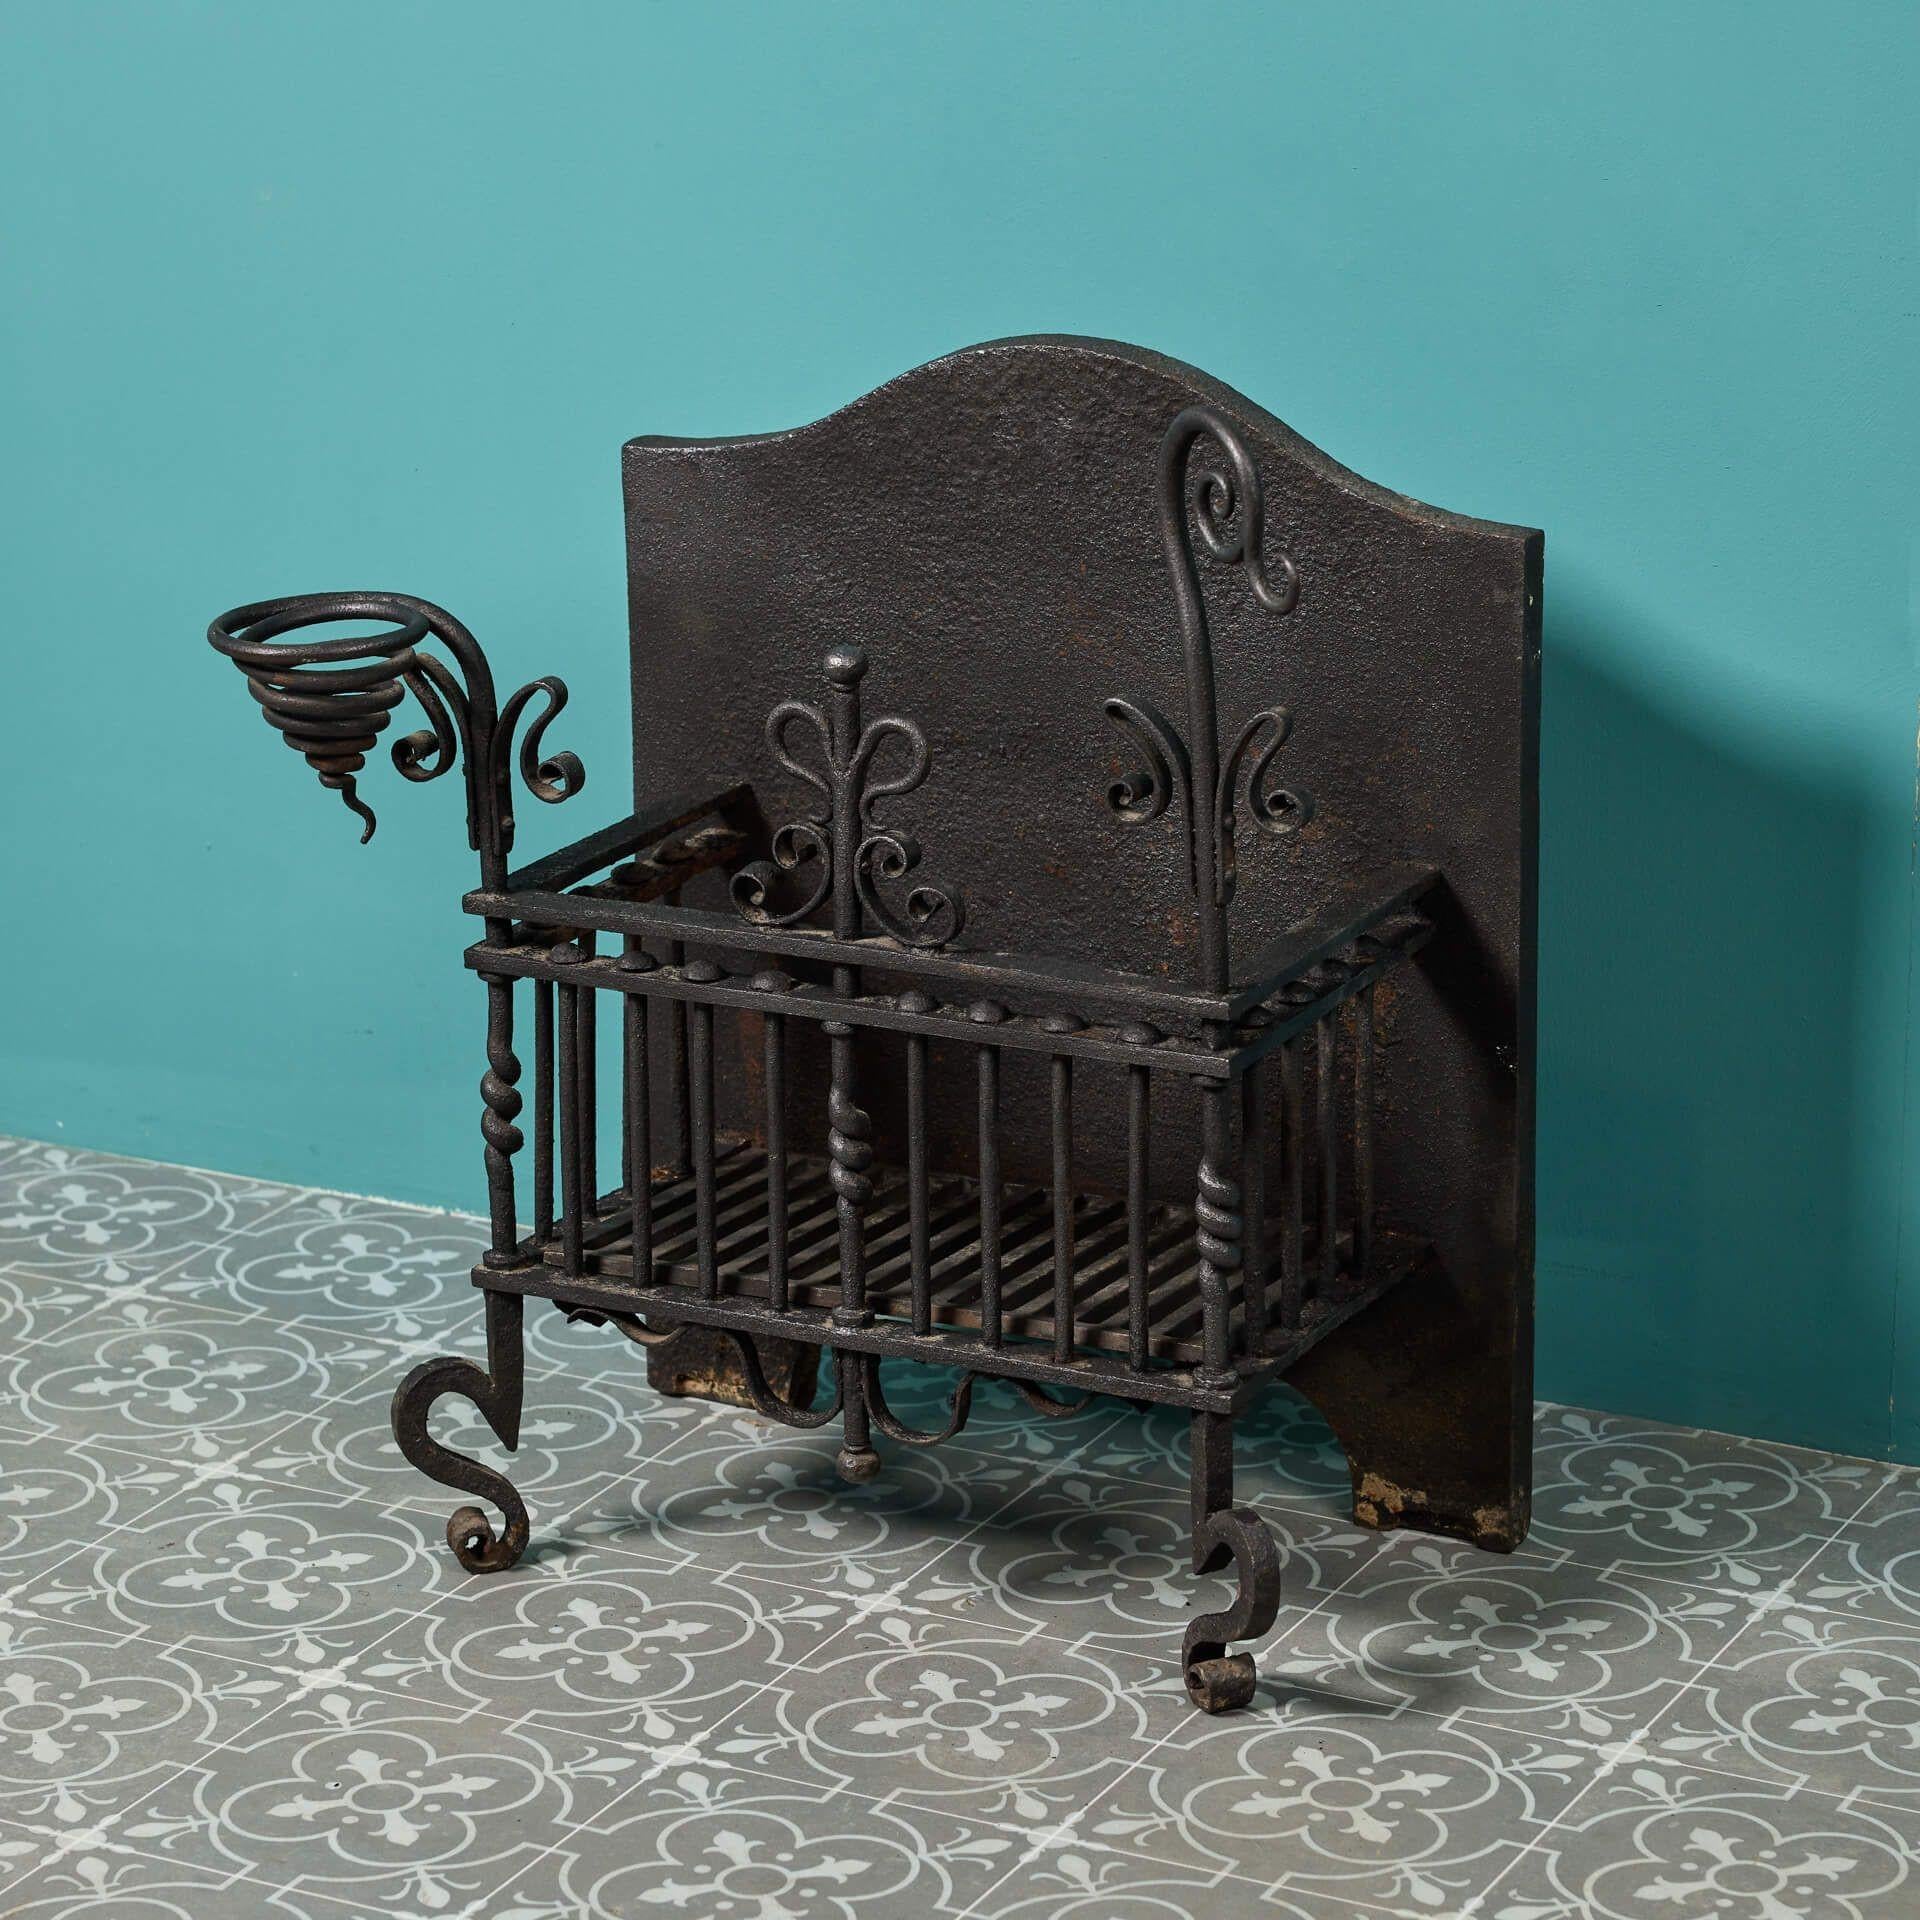 Dating from the late 19th century, this Victorian antique fire brazier is decoratively made using a range of techniques. While the back is cast in iron – as is typical of many antique fire baskets – the front is finely worked in wrought iron, heated